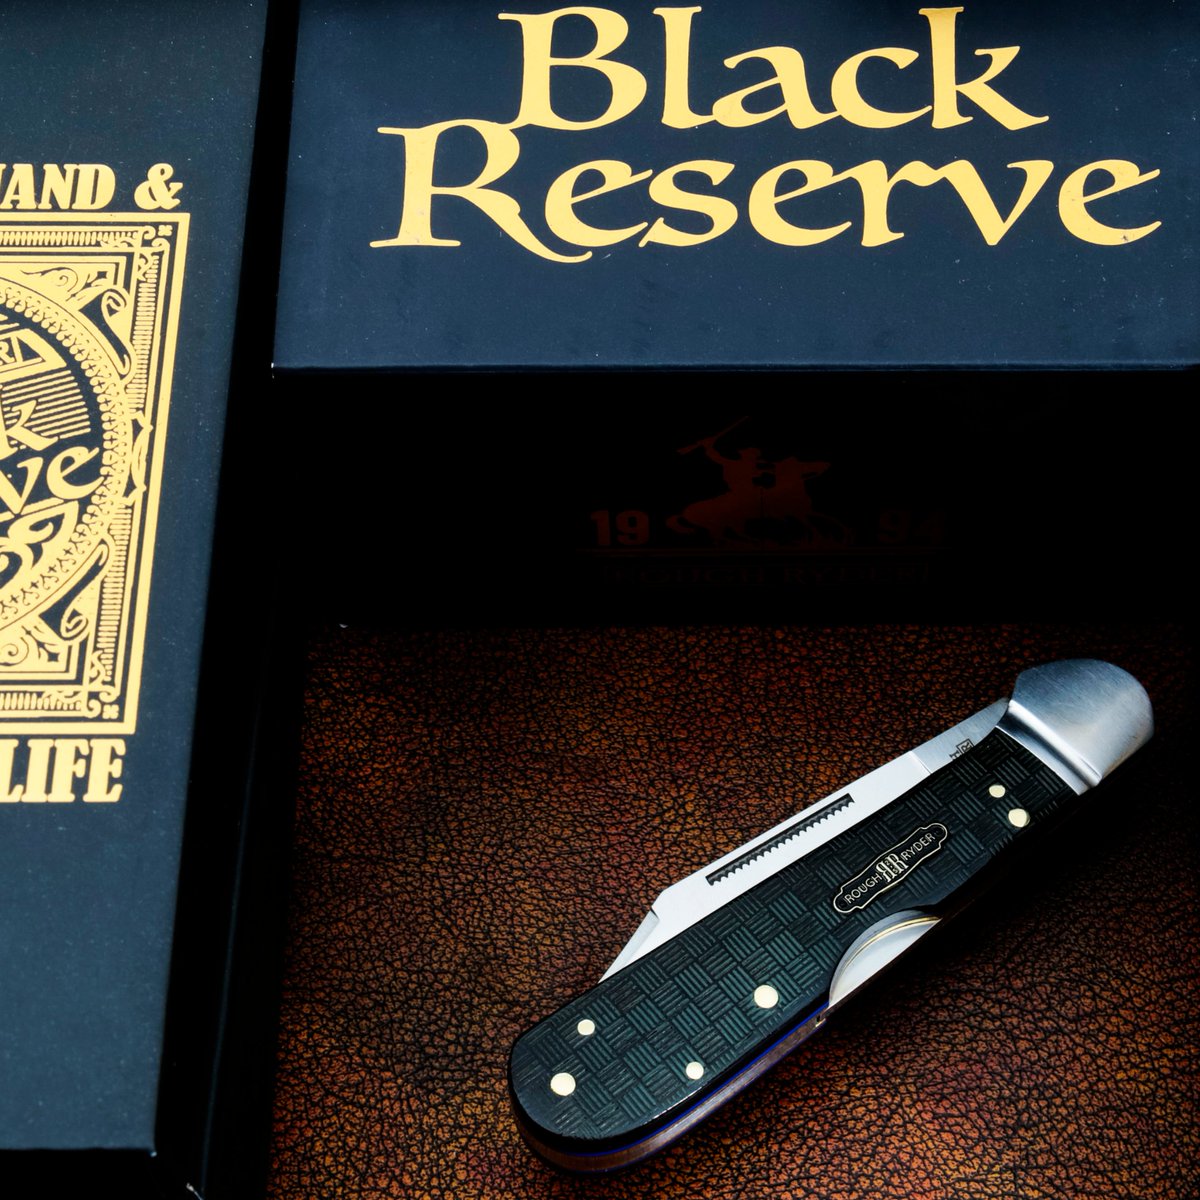 bit.ly/47OEfcc
Built by hand and backed for life The NEW Rough Ryder Black Reserve Series is built and designed by collectors for collectors. Black Reserve Copperhead has a 2.62' clip point blade with a sturdy back lock & black basketweave Pakkawood handles
Link in Bio!